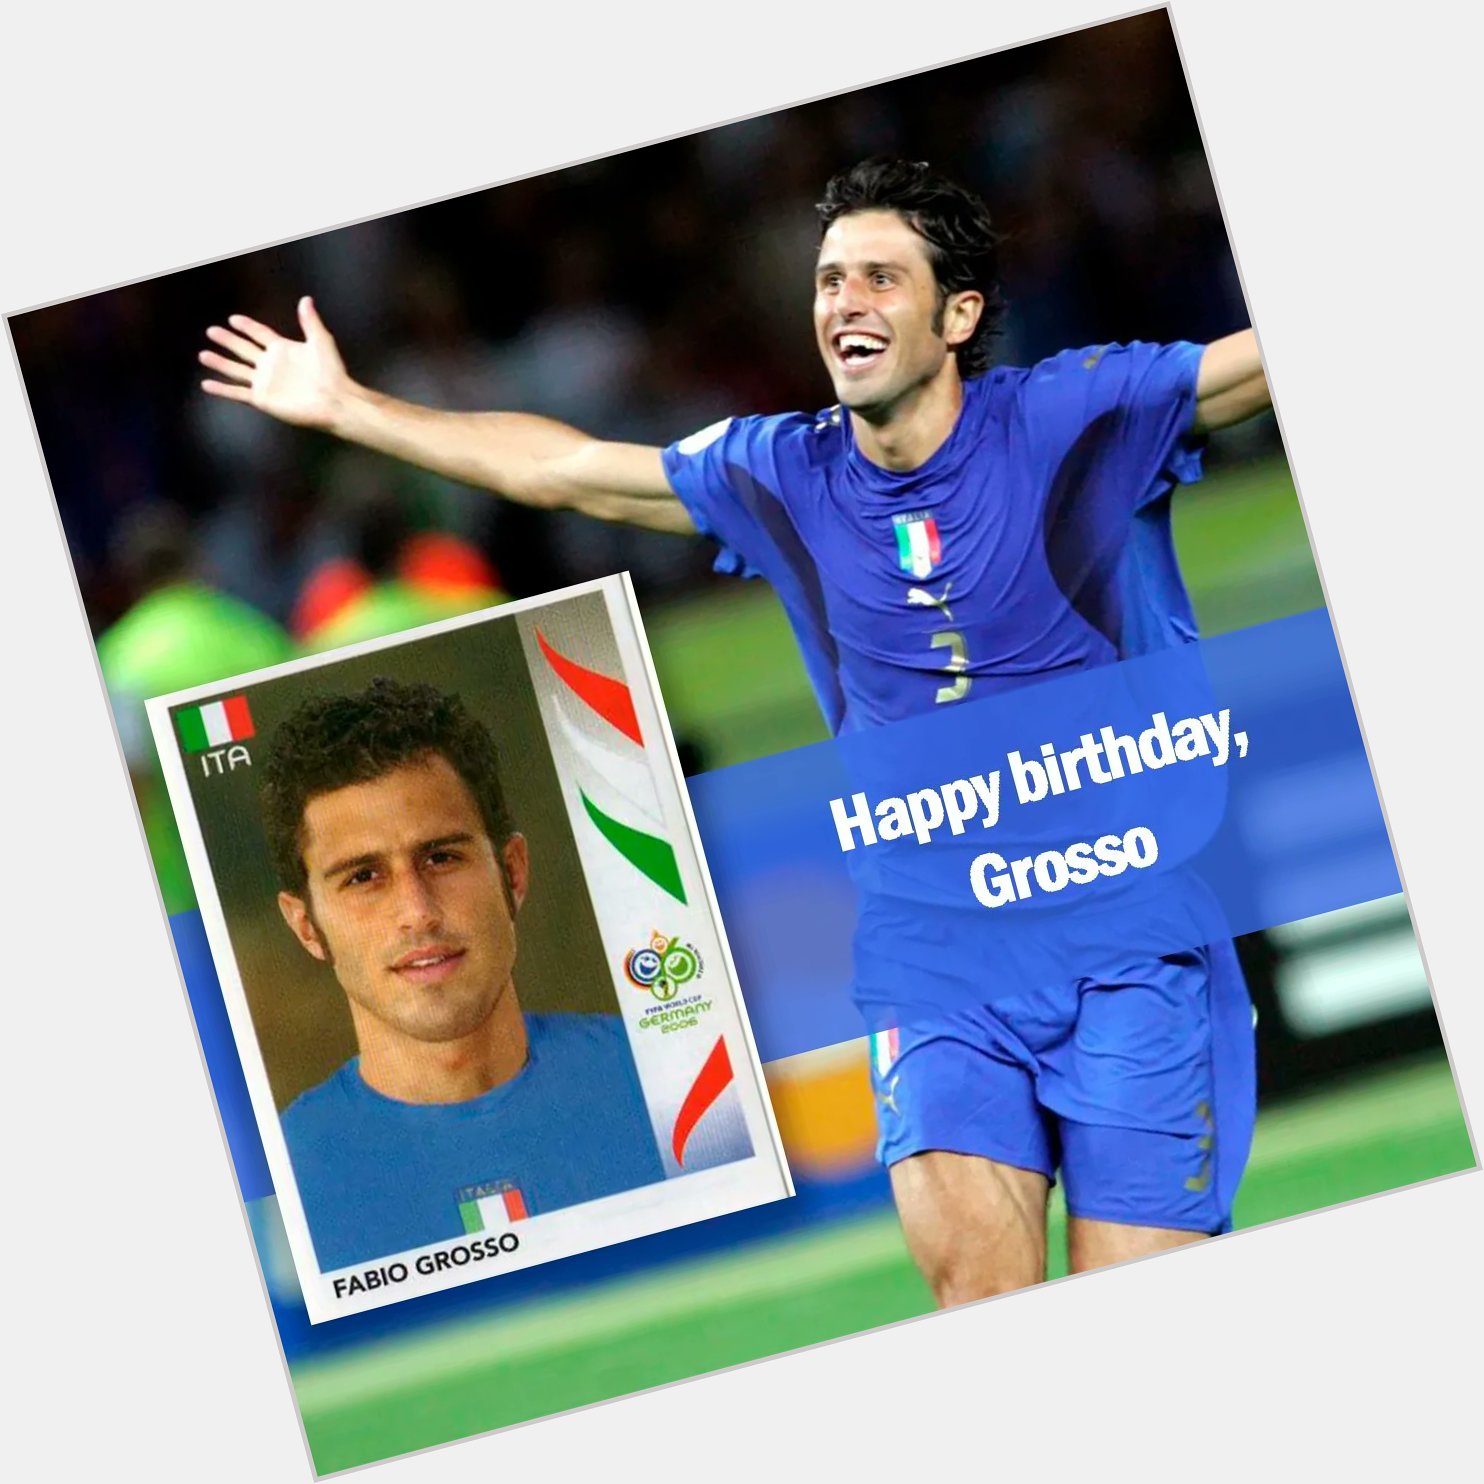 One of the 2006 World Cup heroes for Italy: Fabio Grosso!!! Happy birthday!!! 